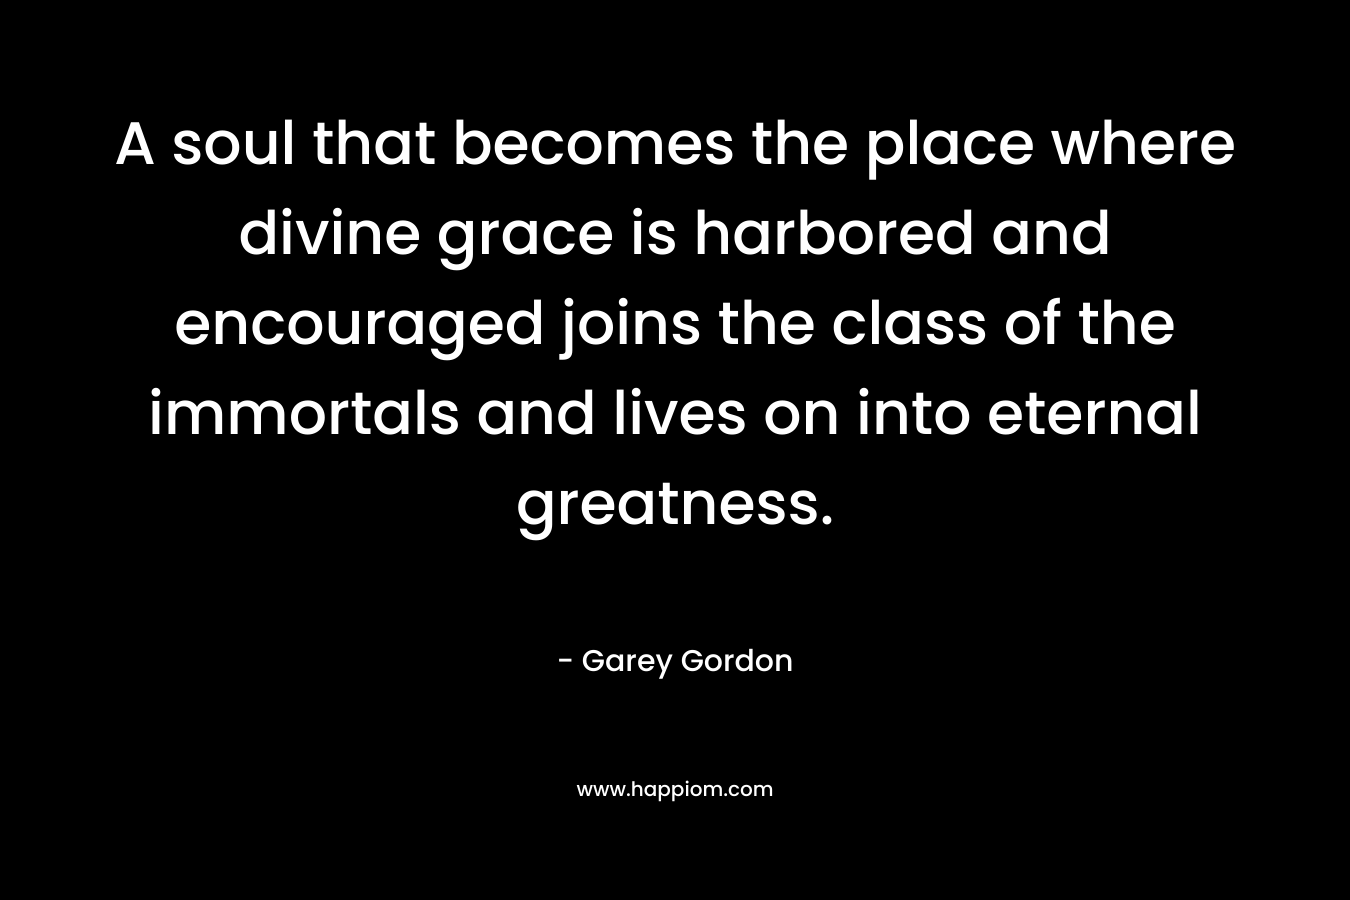 A soul that becomes the place where divine grace is harbored and encouraged joins the class of the immortals and lives on into eternal greatness. – Garey  Gordon